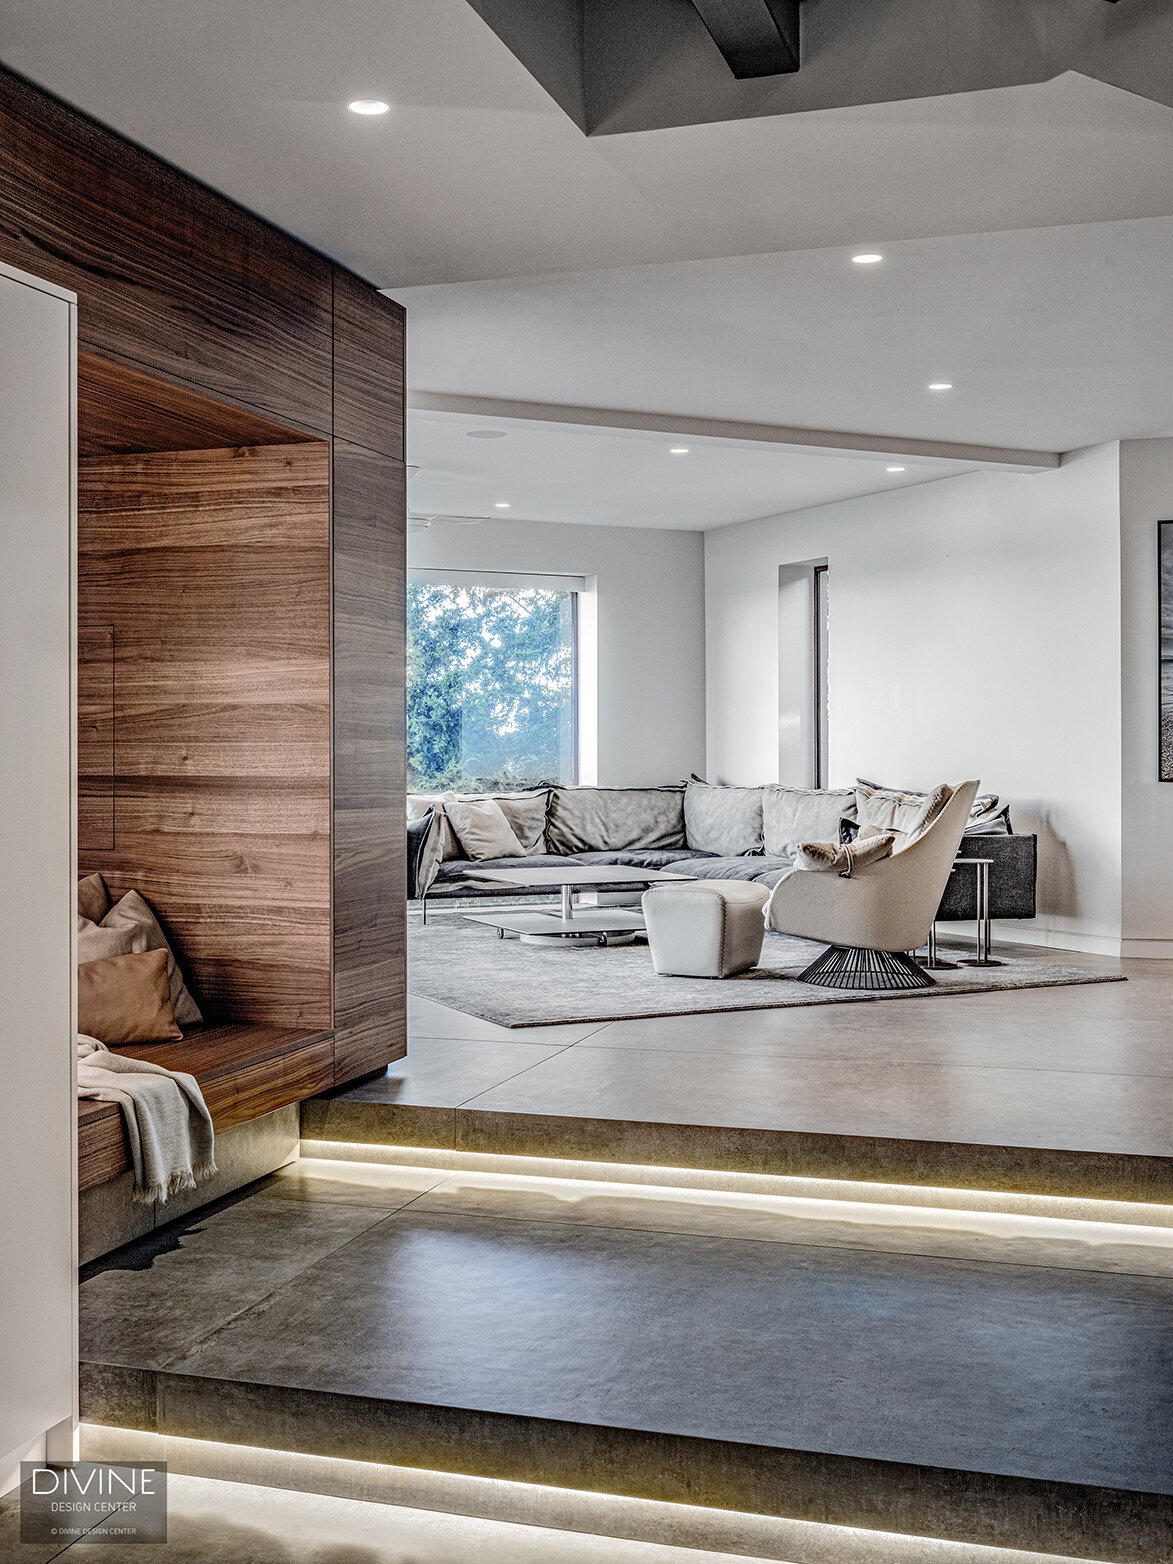  A niche seating area in walnut in the forefront in the step down of a concrete step with architectural lighting below - in the background is a large living area in cool, grey tones with Leolux and Rolf Benz furniture of a similar modern style. A lar